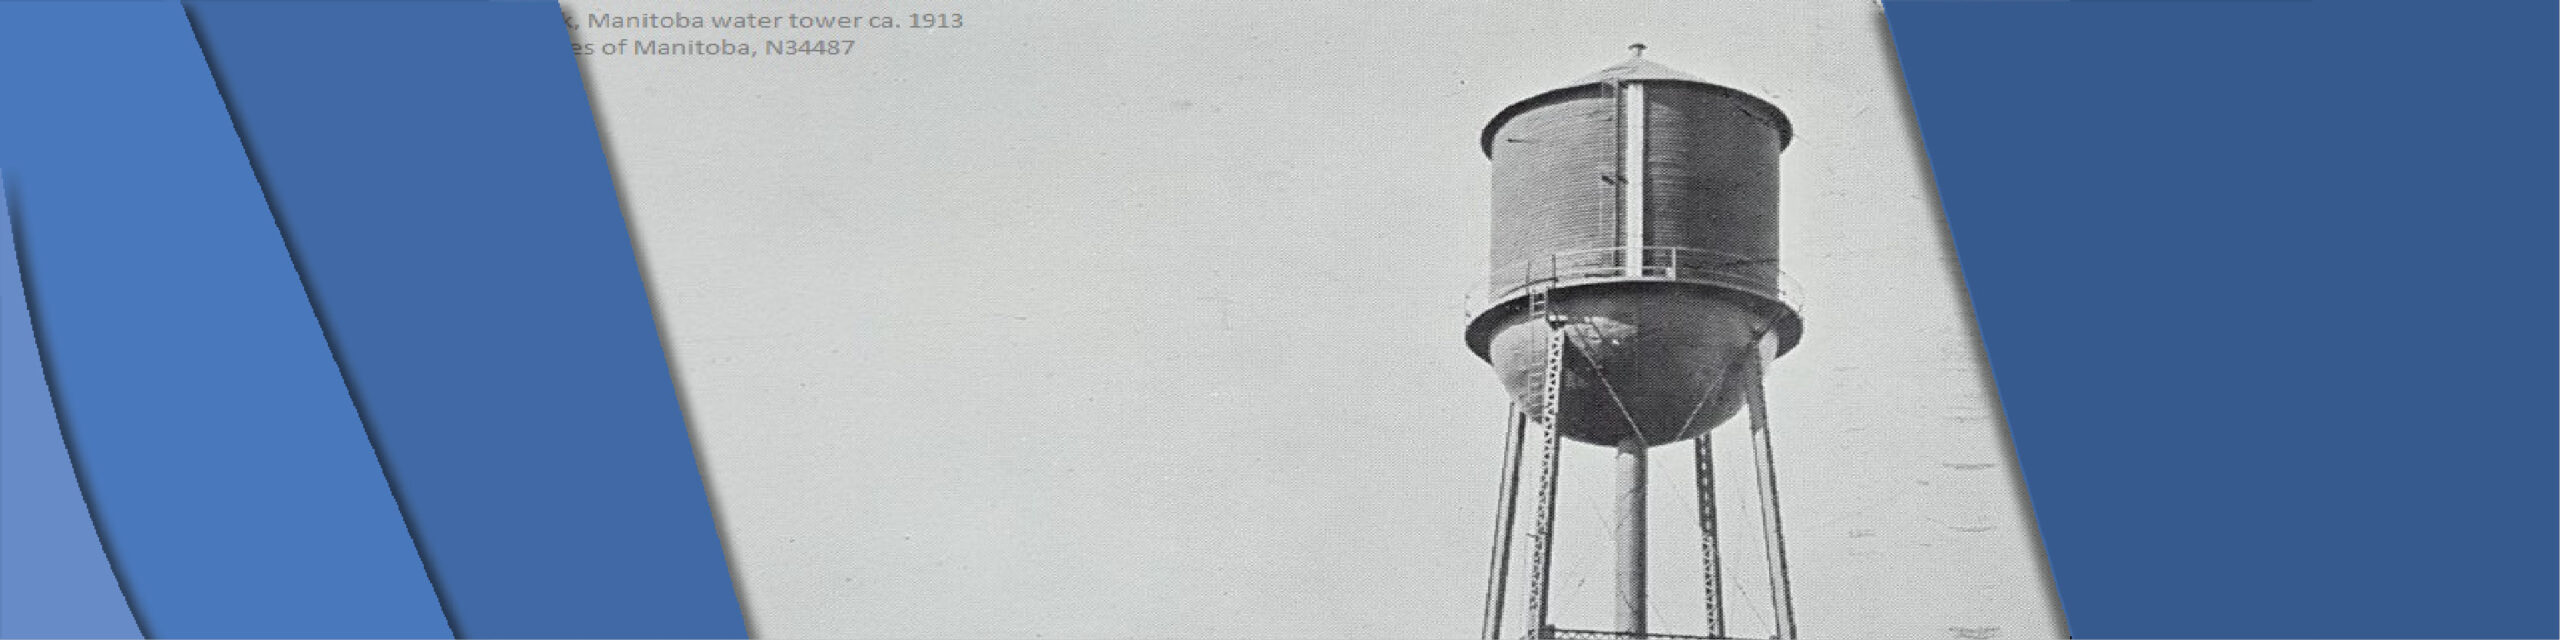 Picture of the original Selkirk water tower from 1913.